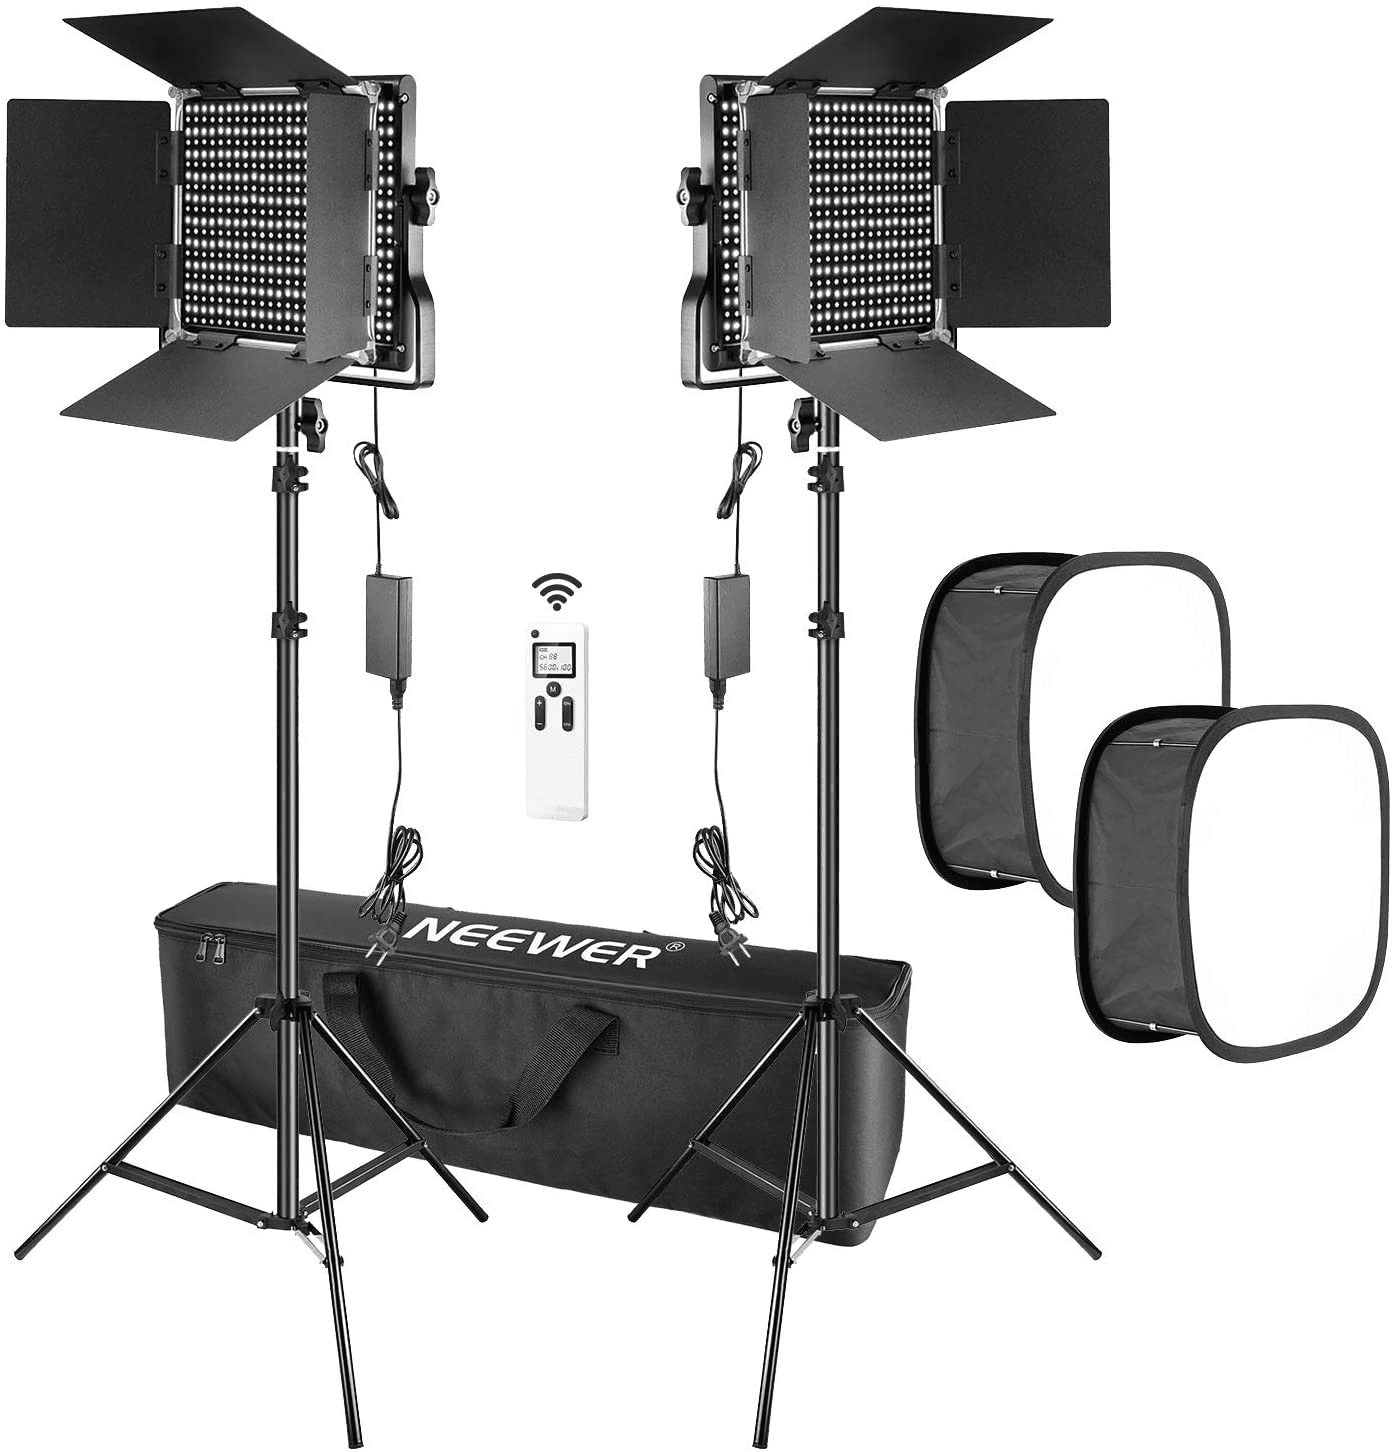 Product 135w Soft Light Umbrella Continuous Lighting Kit Video Shooting with 6x9ft Muslin Backdrop 6.5x10ft Background Support Equipment Used for Portrait 